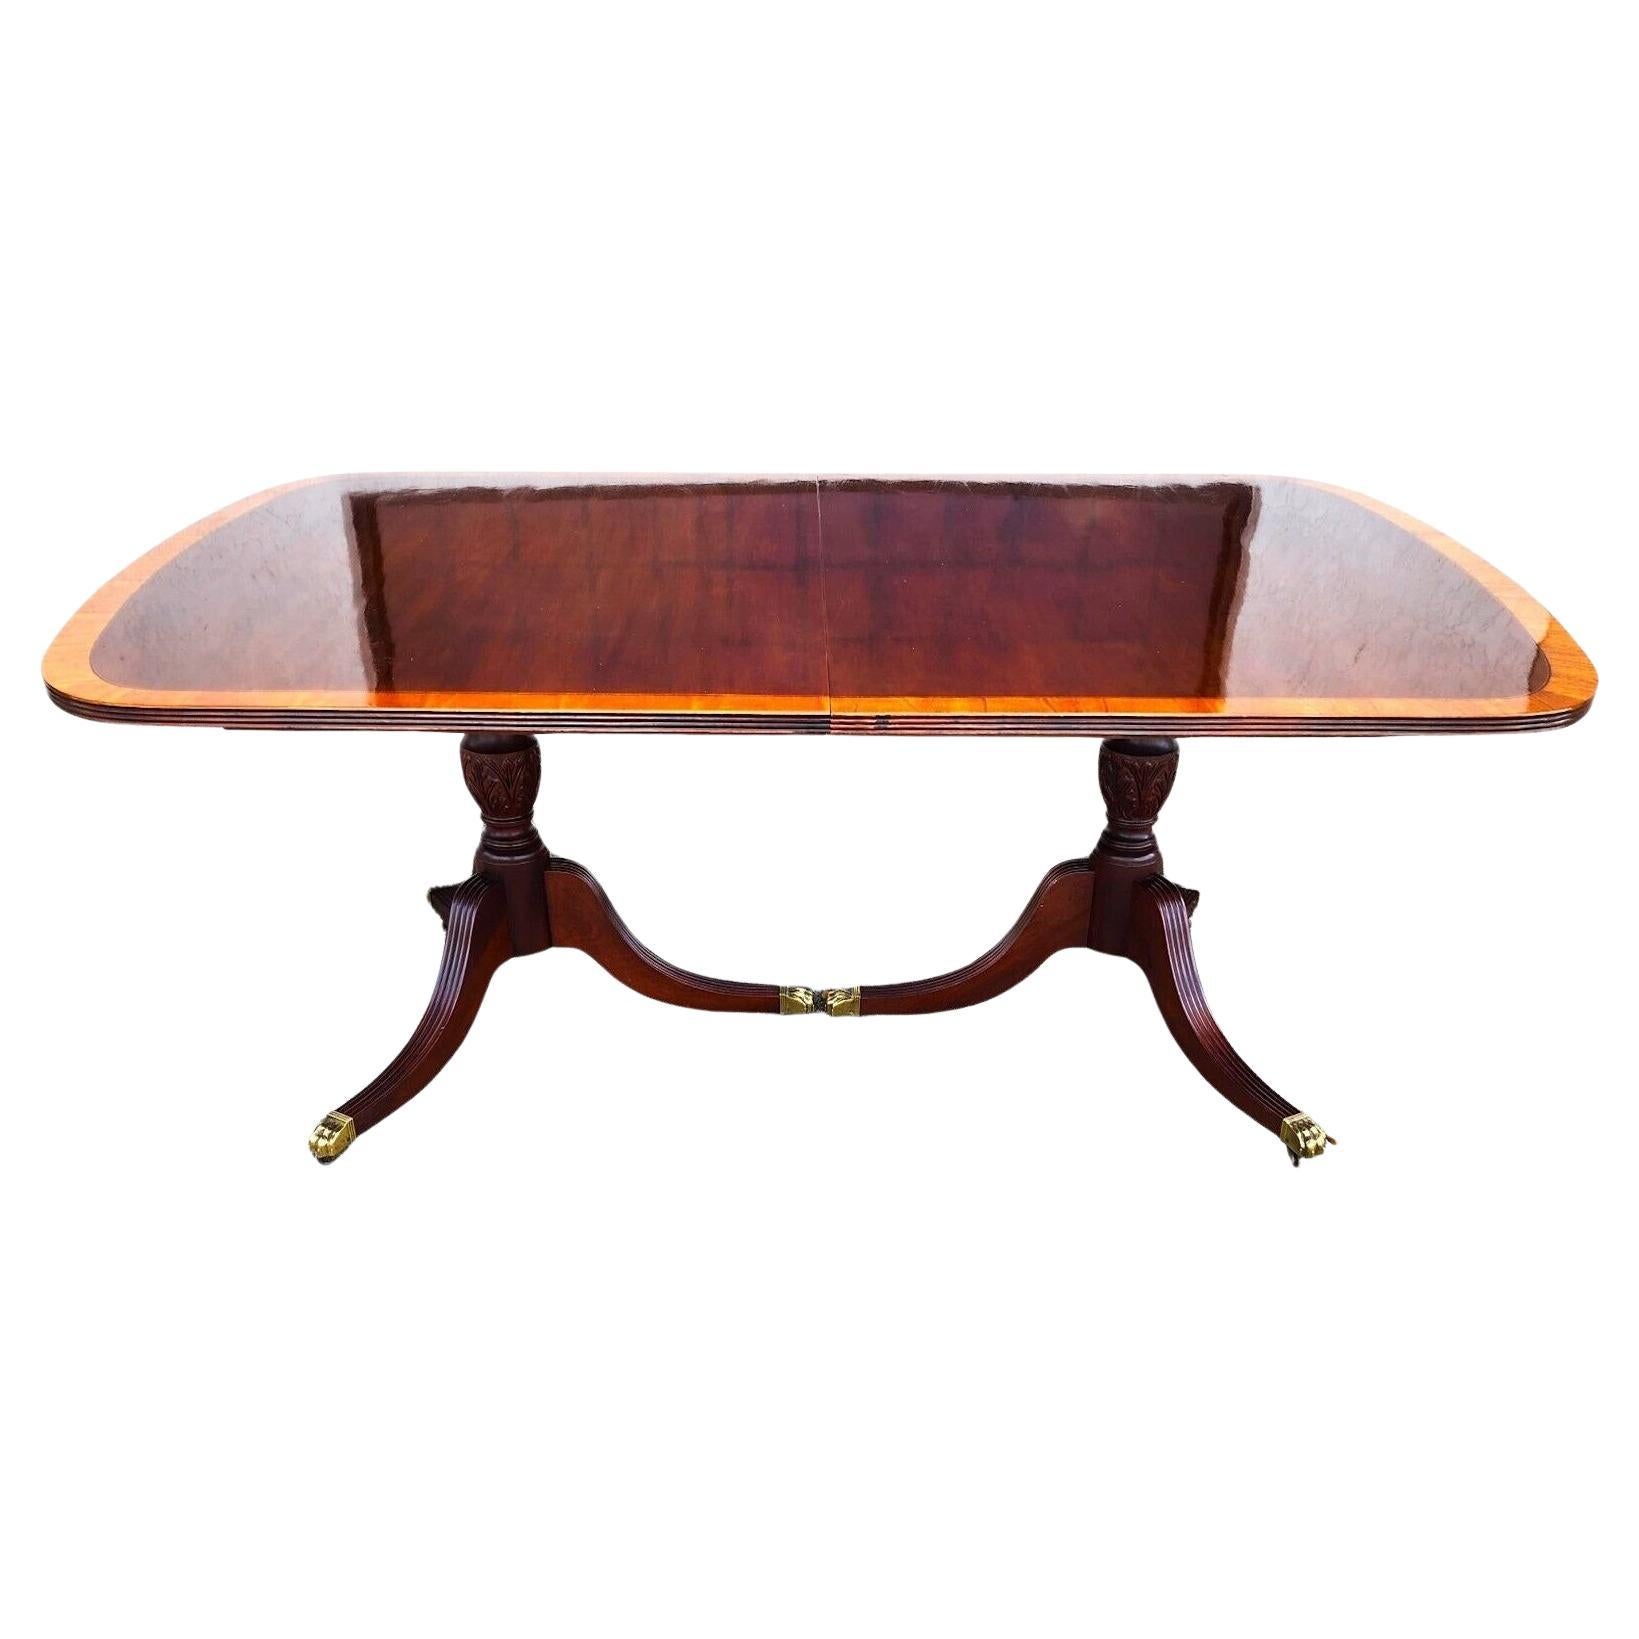 Vintage Mahogany Dining Table Duncan Phyfe Style